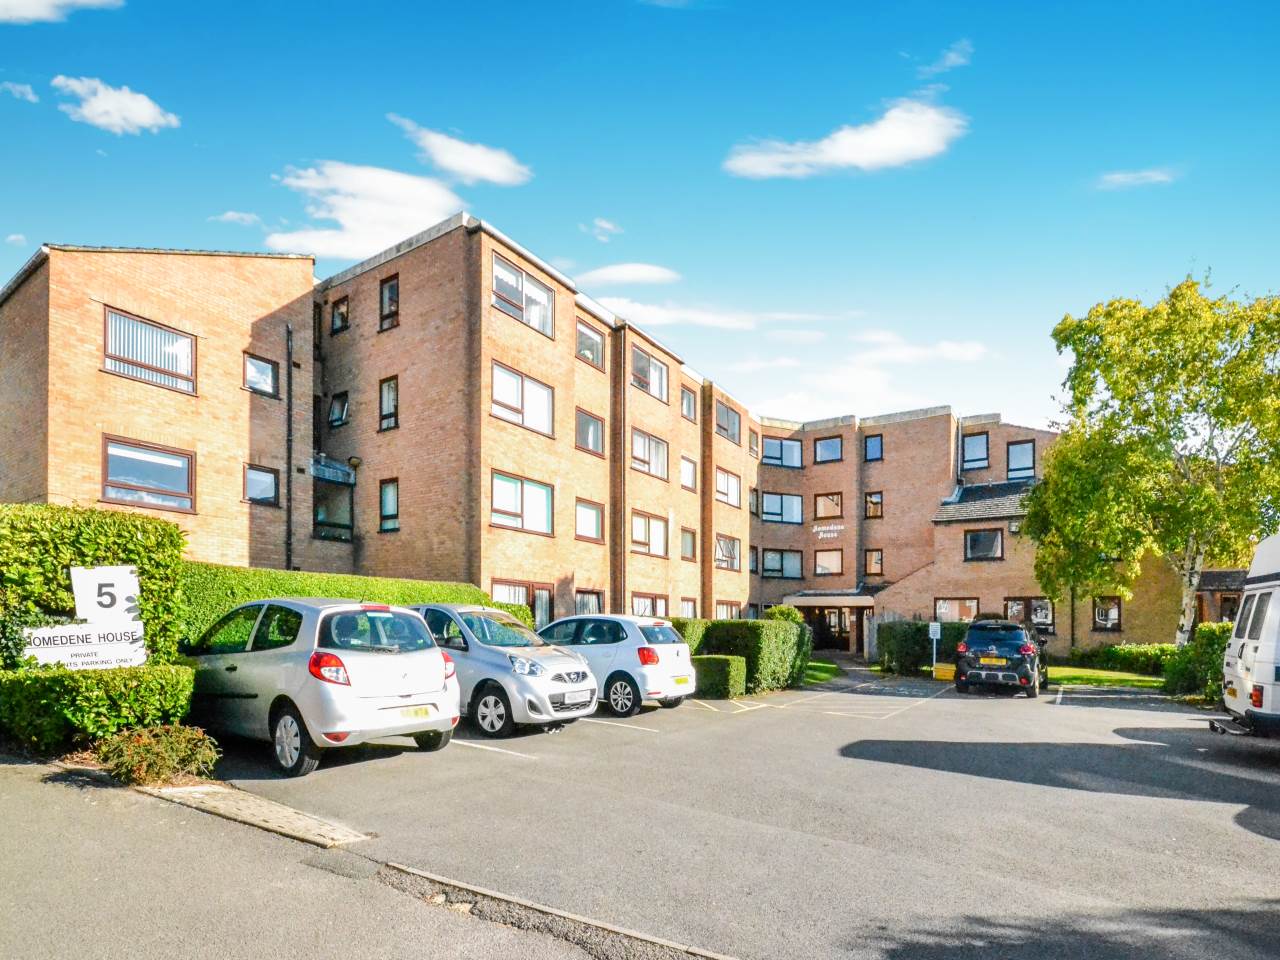 * RETIREMENT FLAT * WALKING DISTANCE TO TOWN CENTRE & POOLE PARK * ONE BEDROOM * FIRST FLOOR * LIFT TO ALL FLOORS * COMMUNAL LOUNGE * COMMUNAL LAUNDRY ROOM * PETS ALLOWED * VENDOR SUITED *